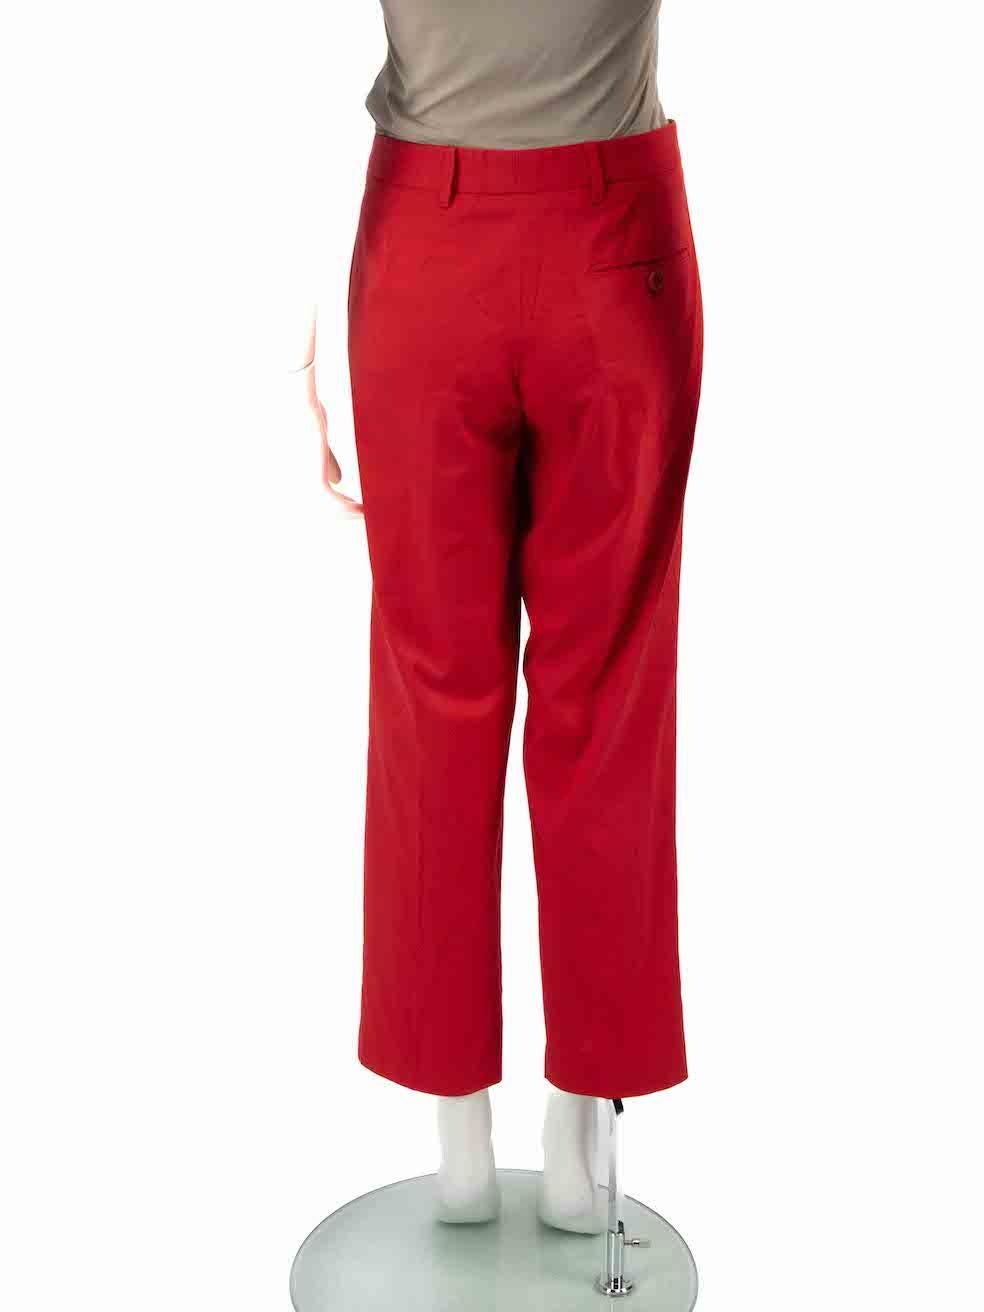 Miu Miu Red Slim Leg Trousers Size XL In Good Condition For Sale In London, GB